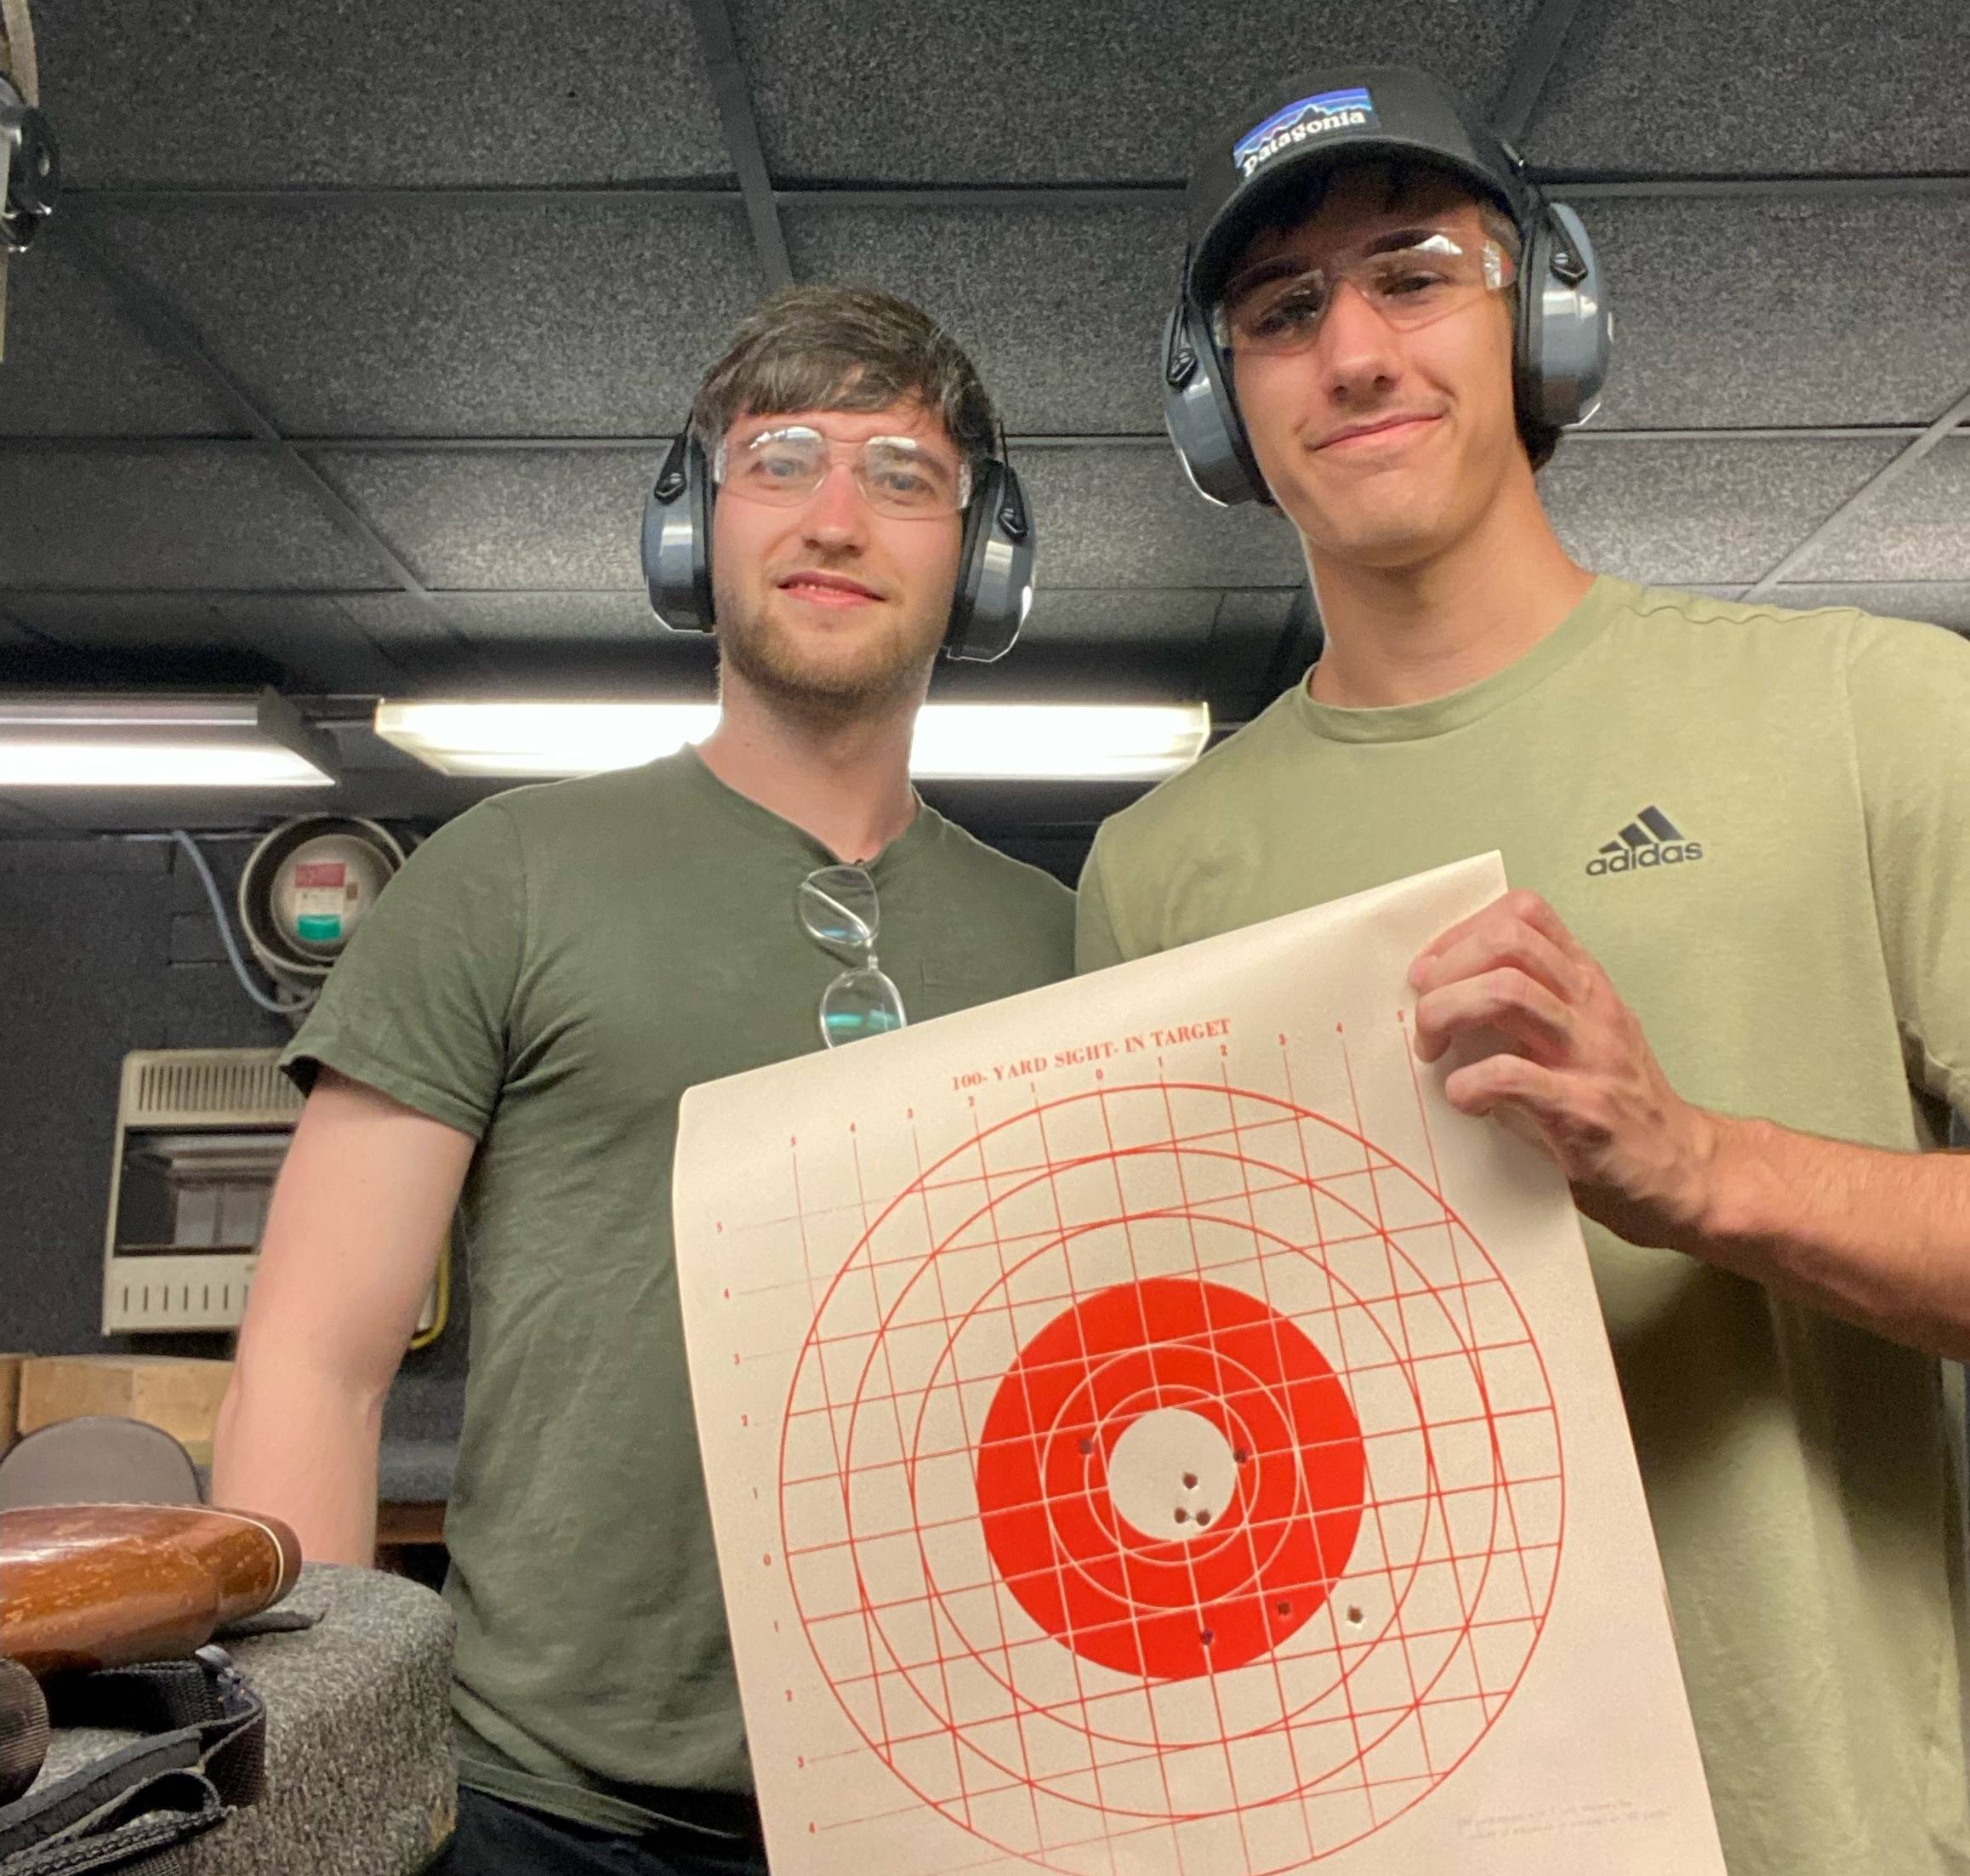 Brent and Lucas at shooting range